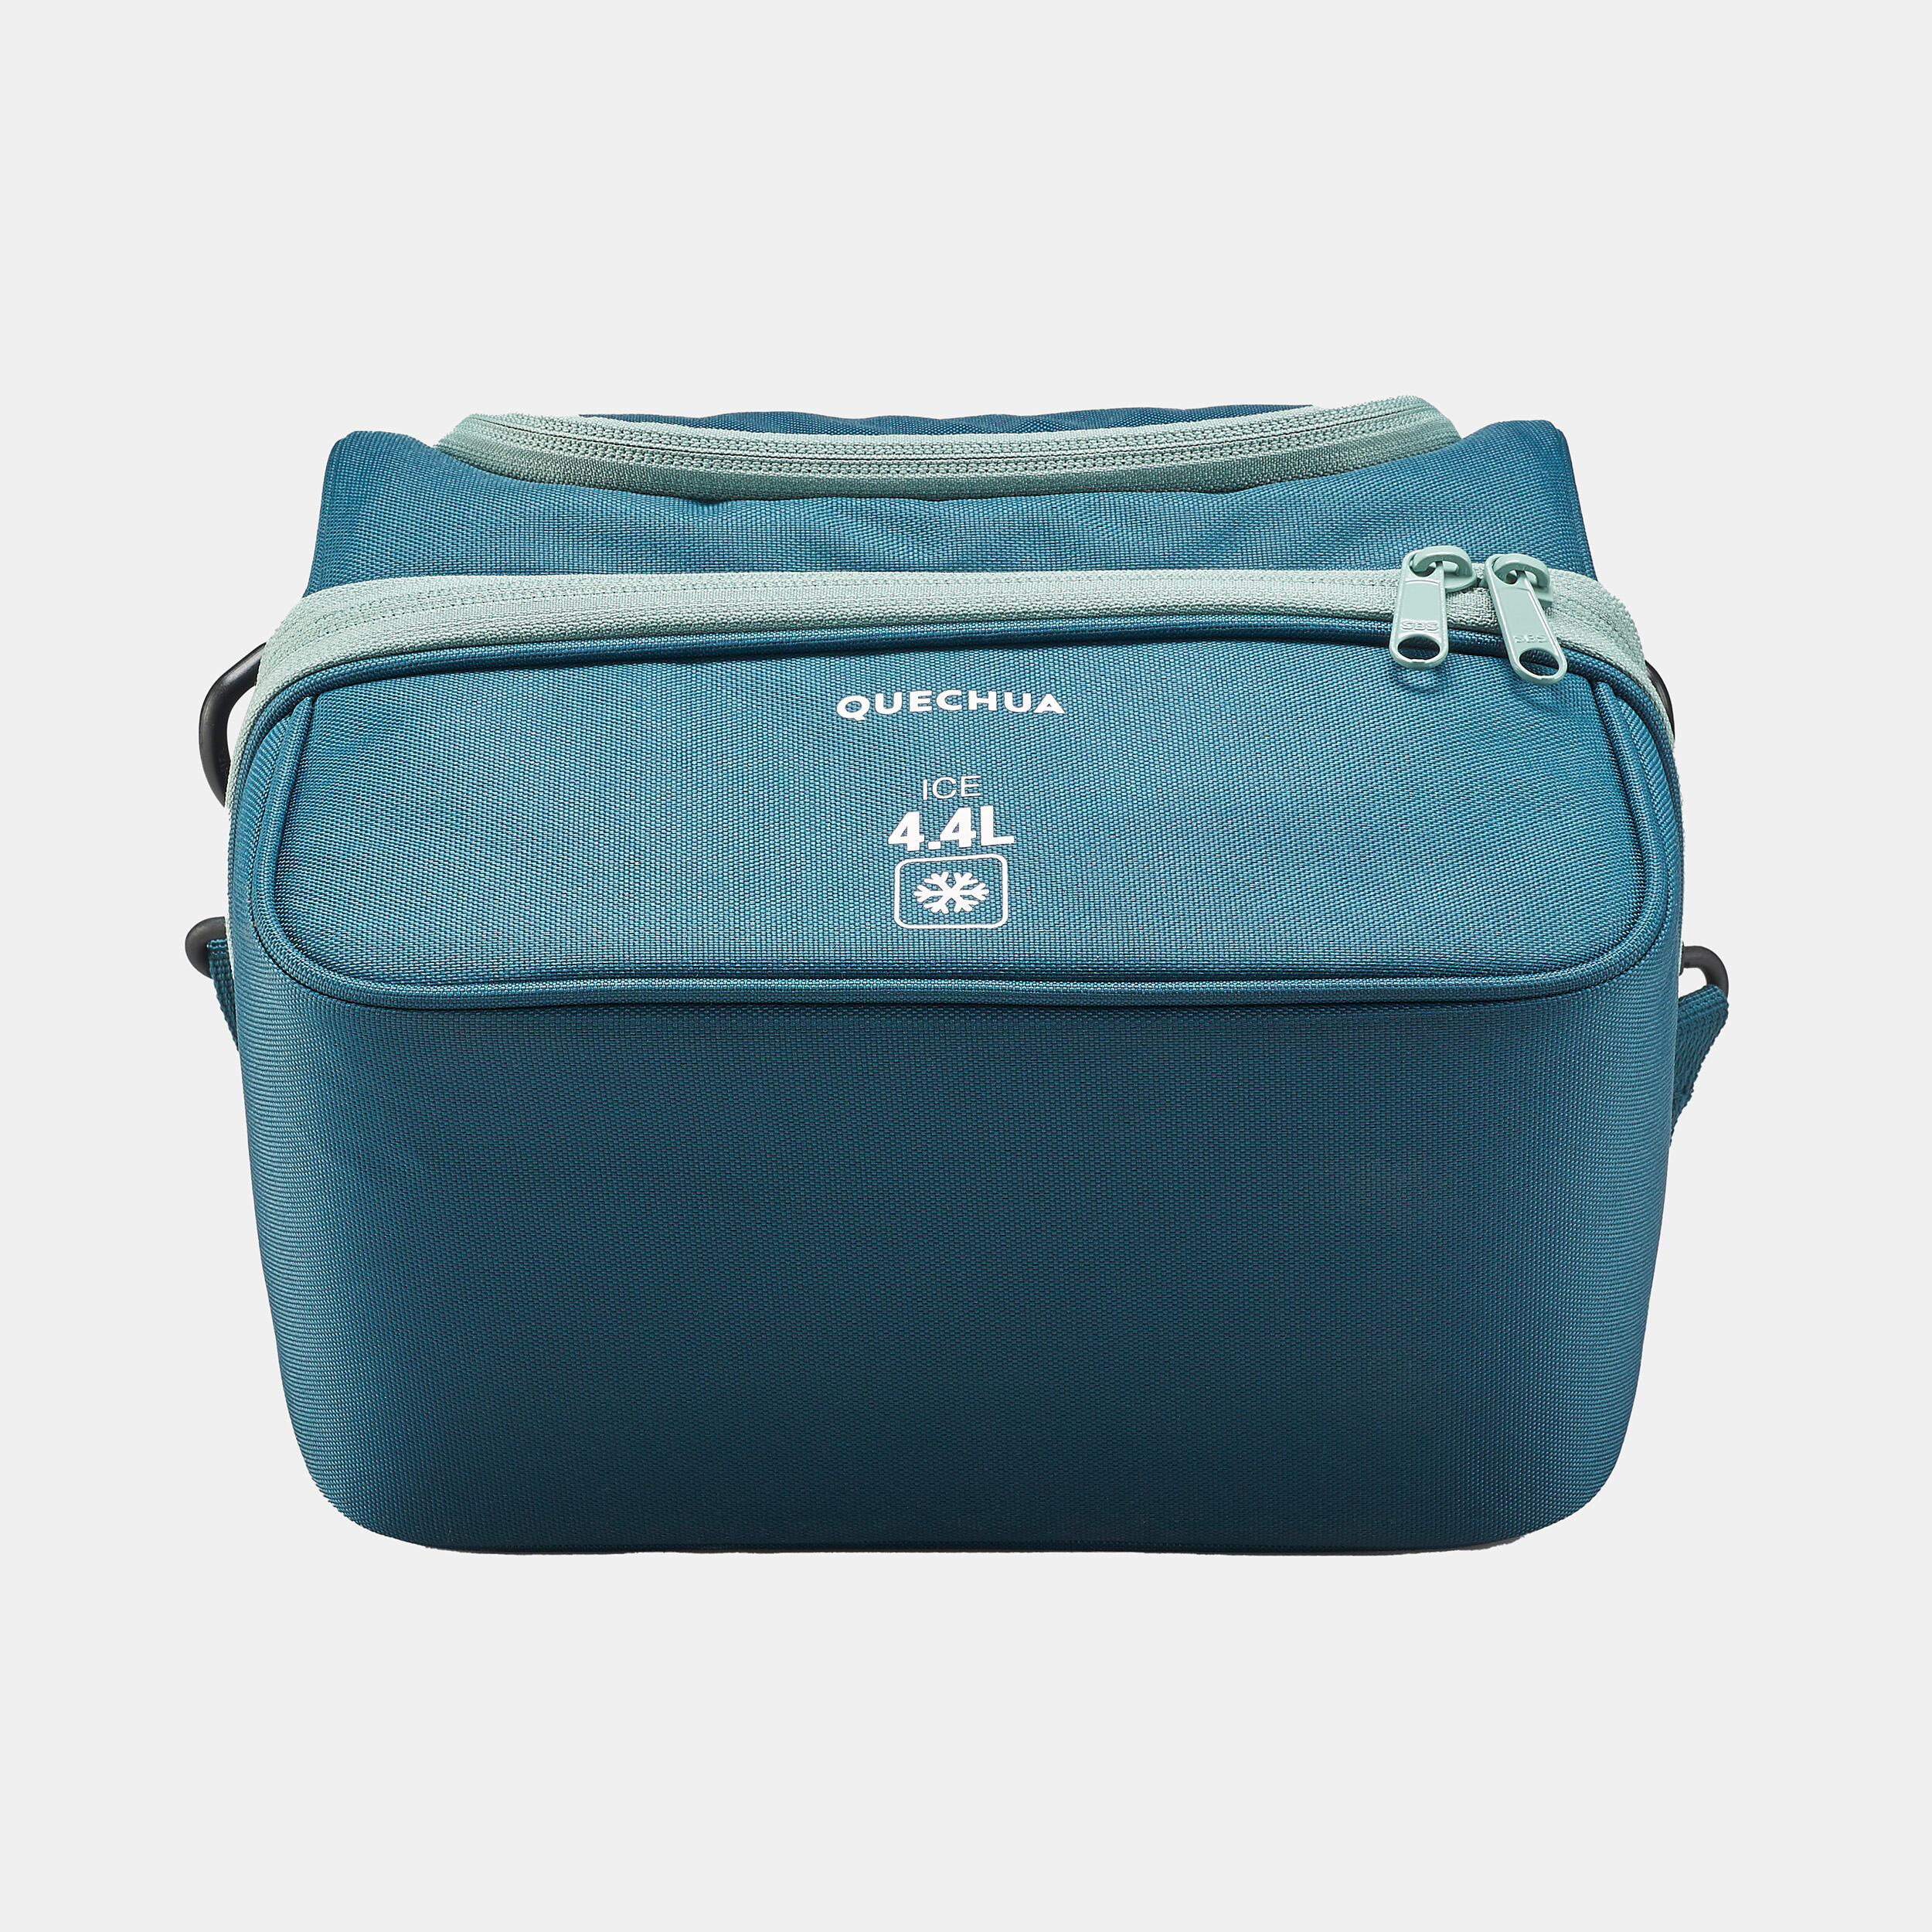 Insulated lunch box 100 - 4.4 Litres - 2 food storage boxes included 5/7